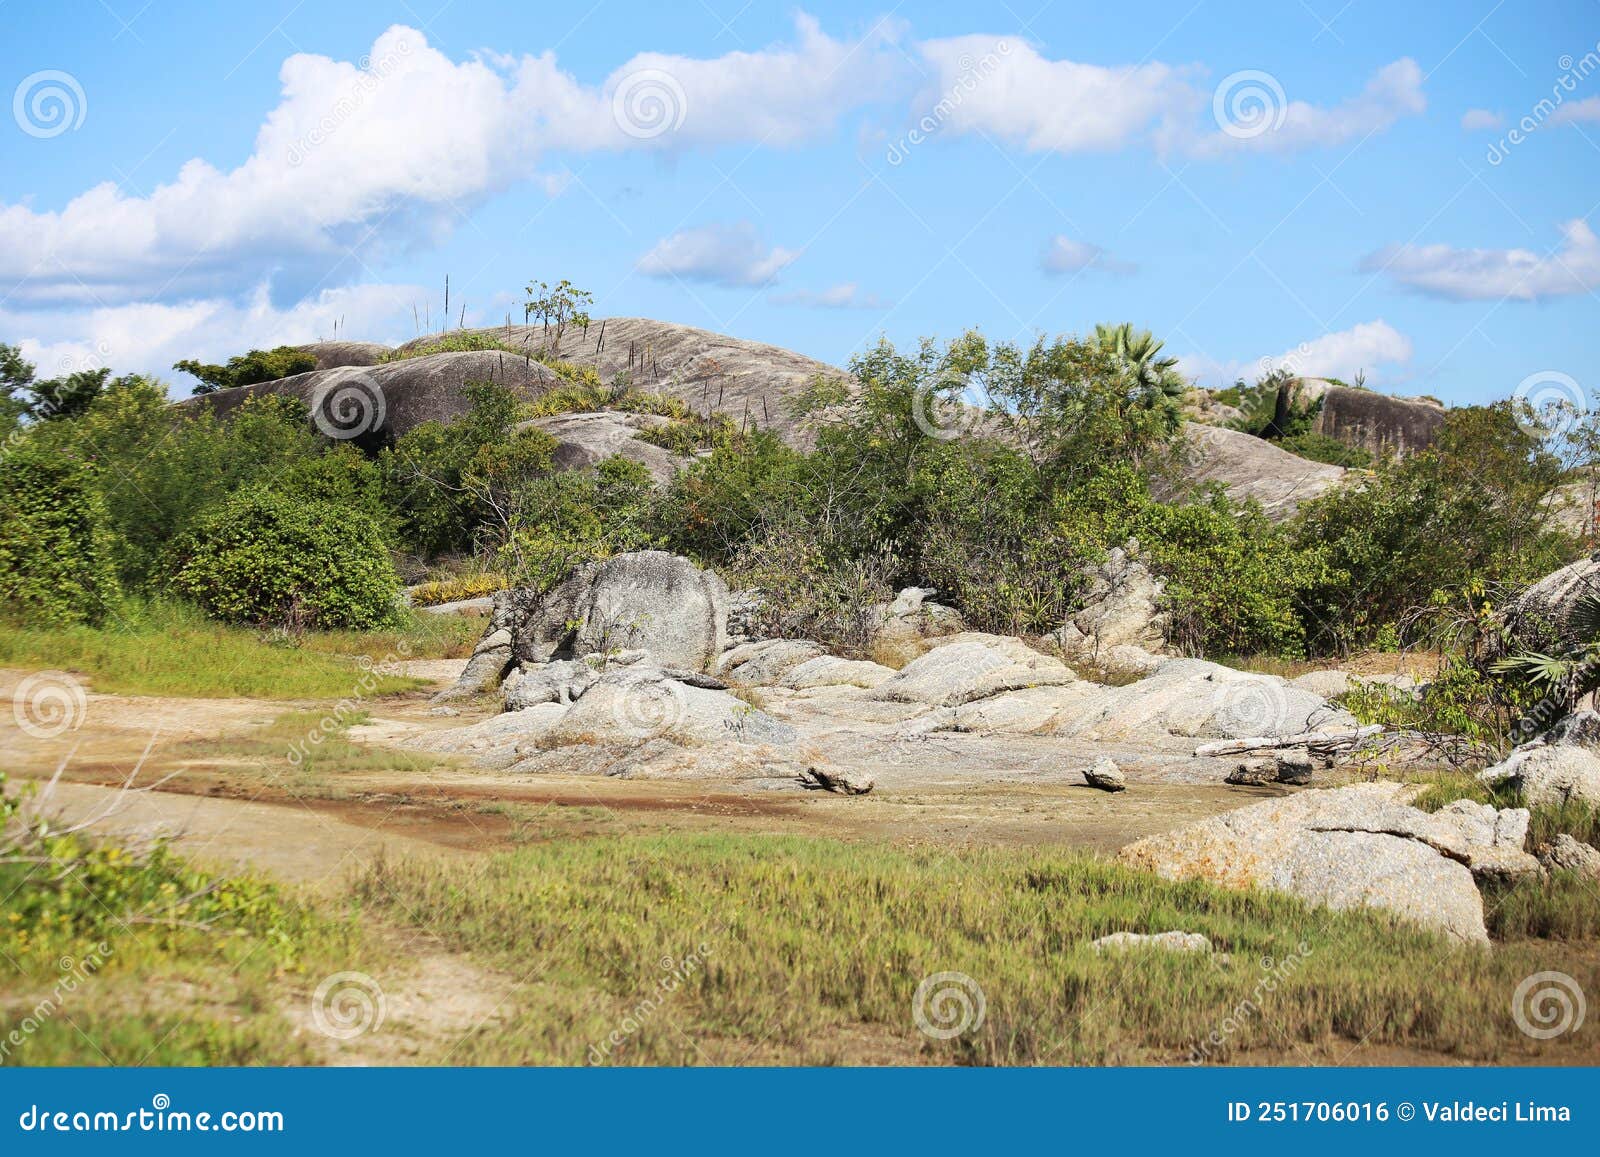 big rocks and undergrowth with small trees in the region close to the sea, northeast of brazil.